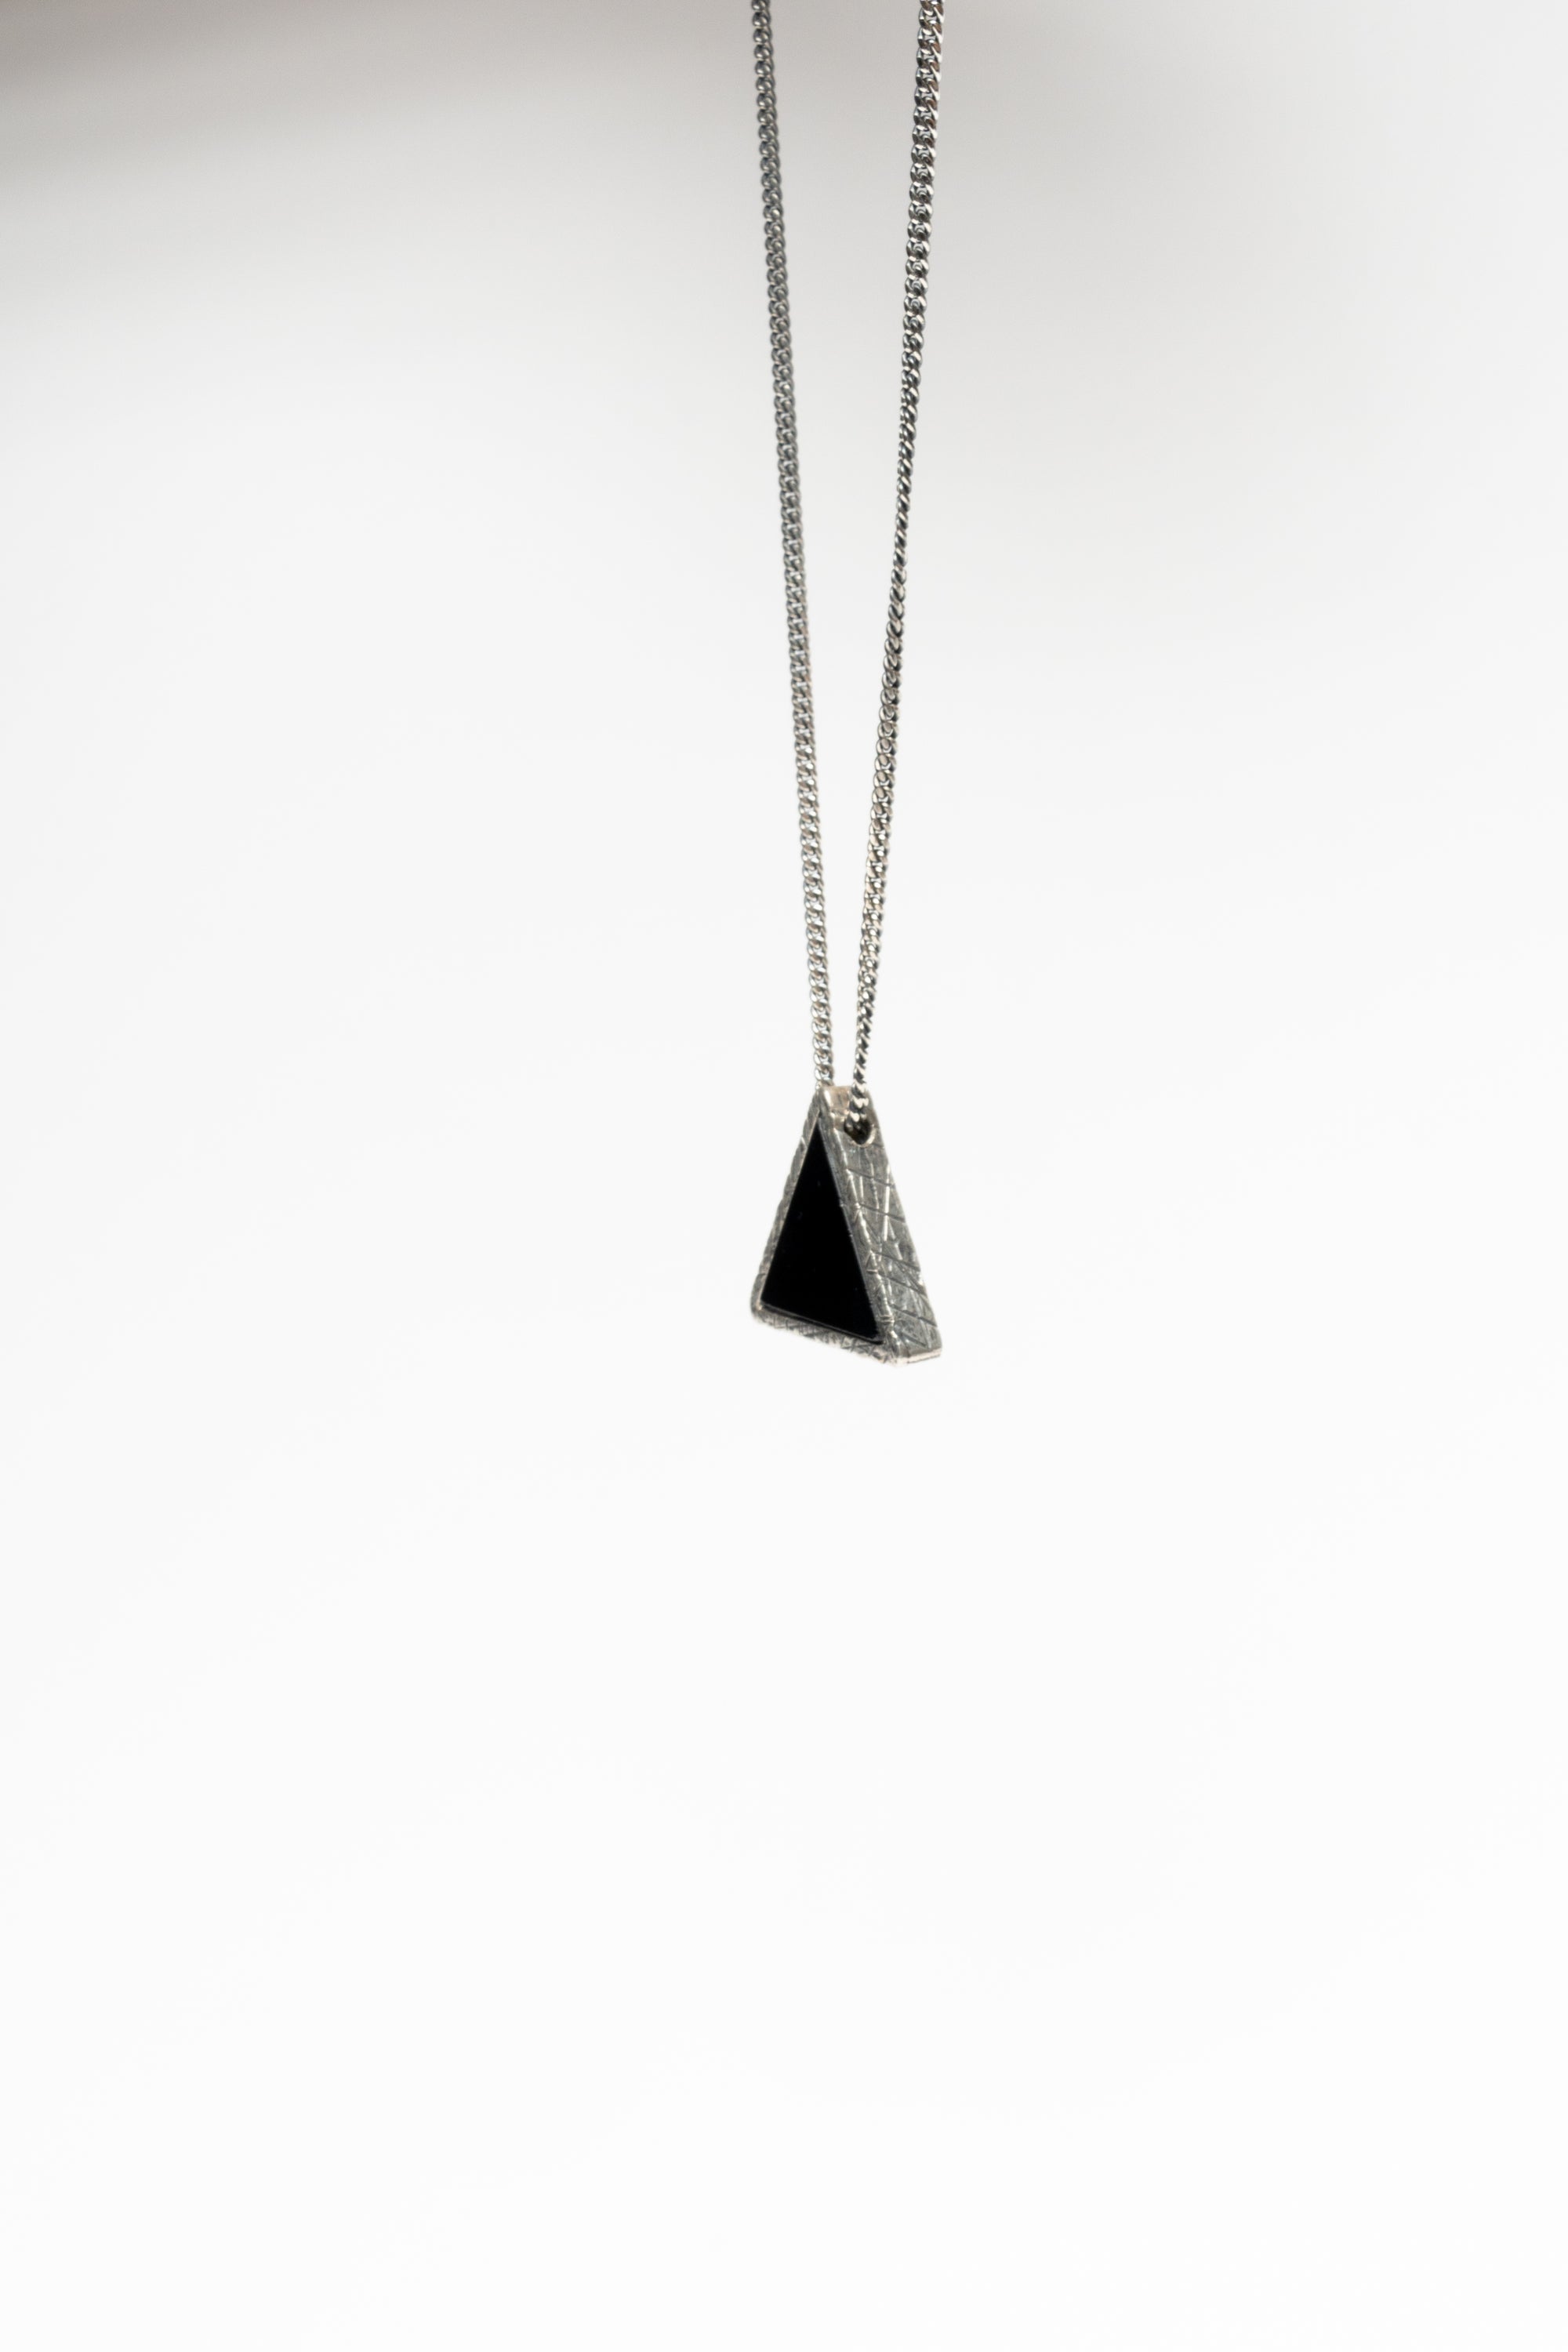 BLACK OBSIDIAN TRIANGLE NECKLACE